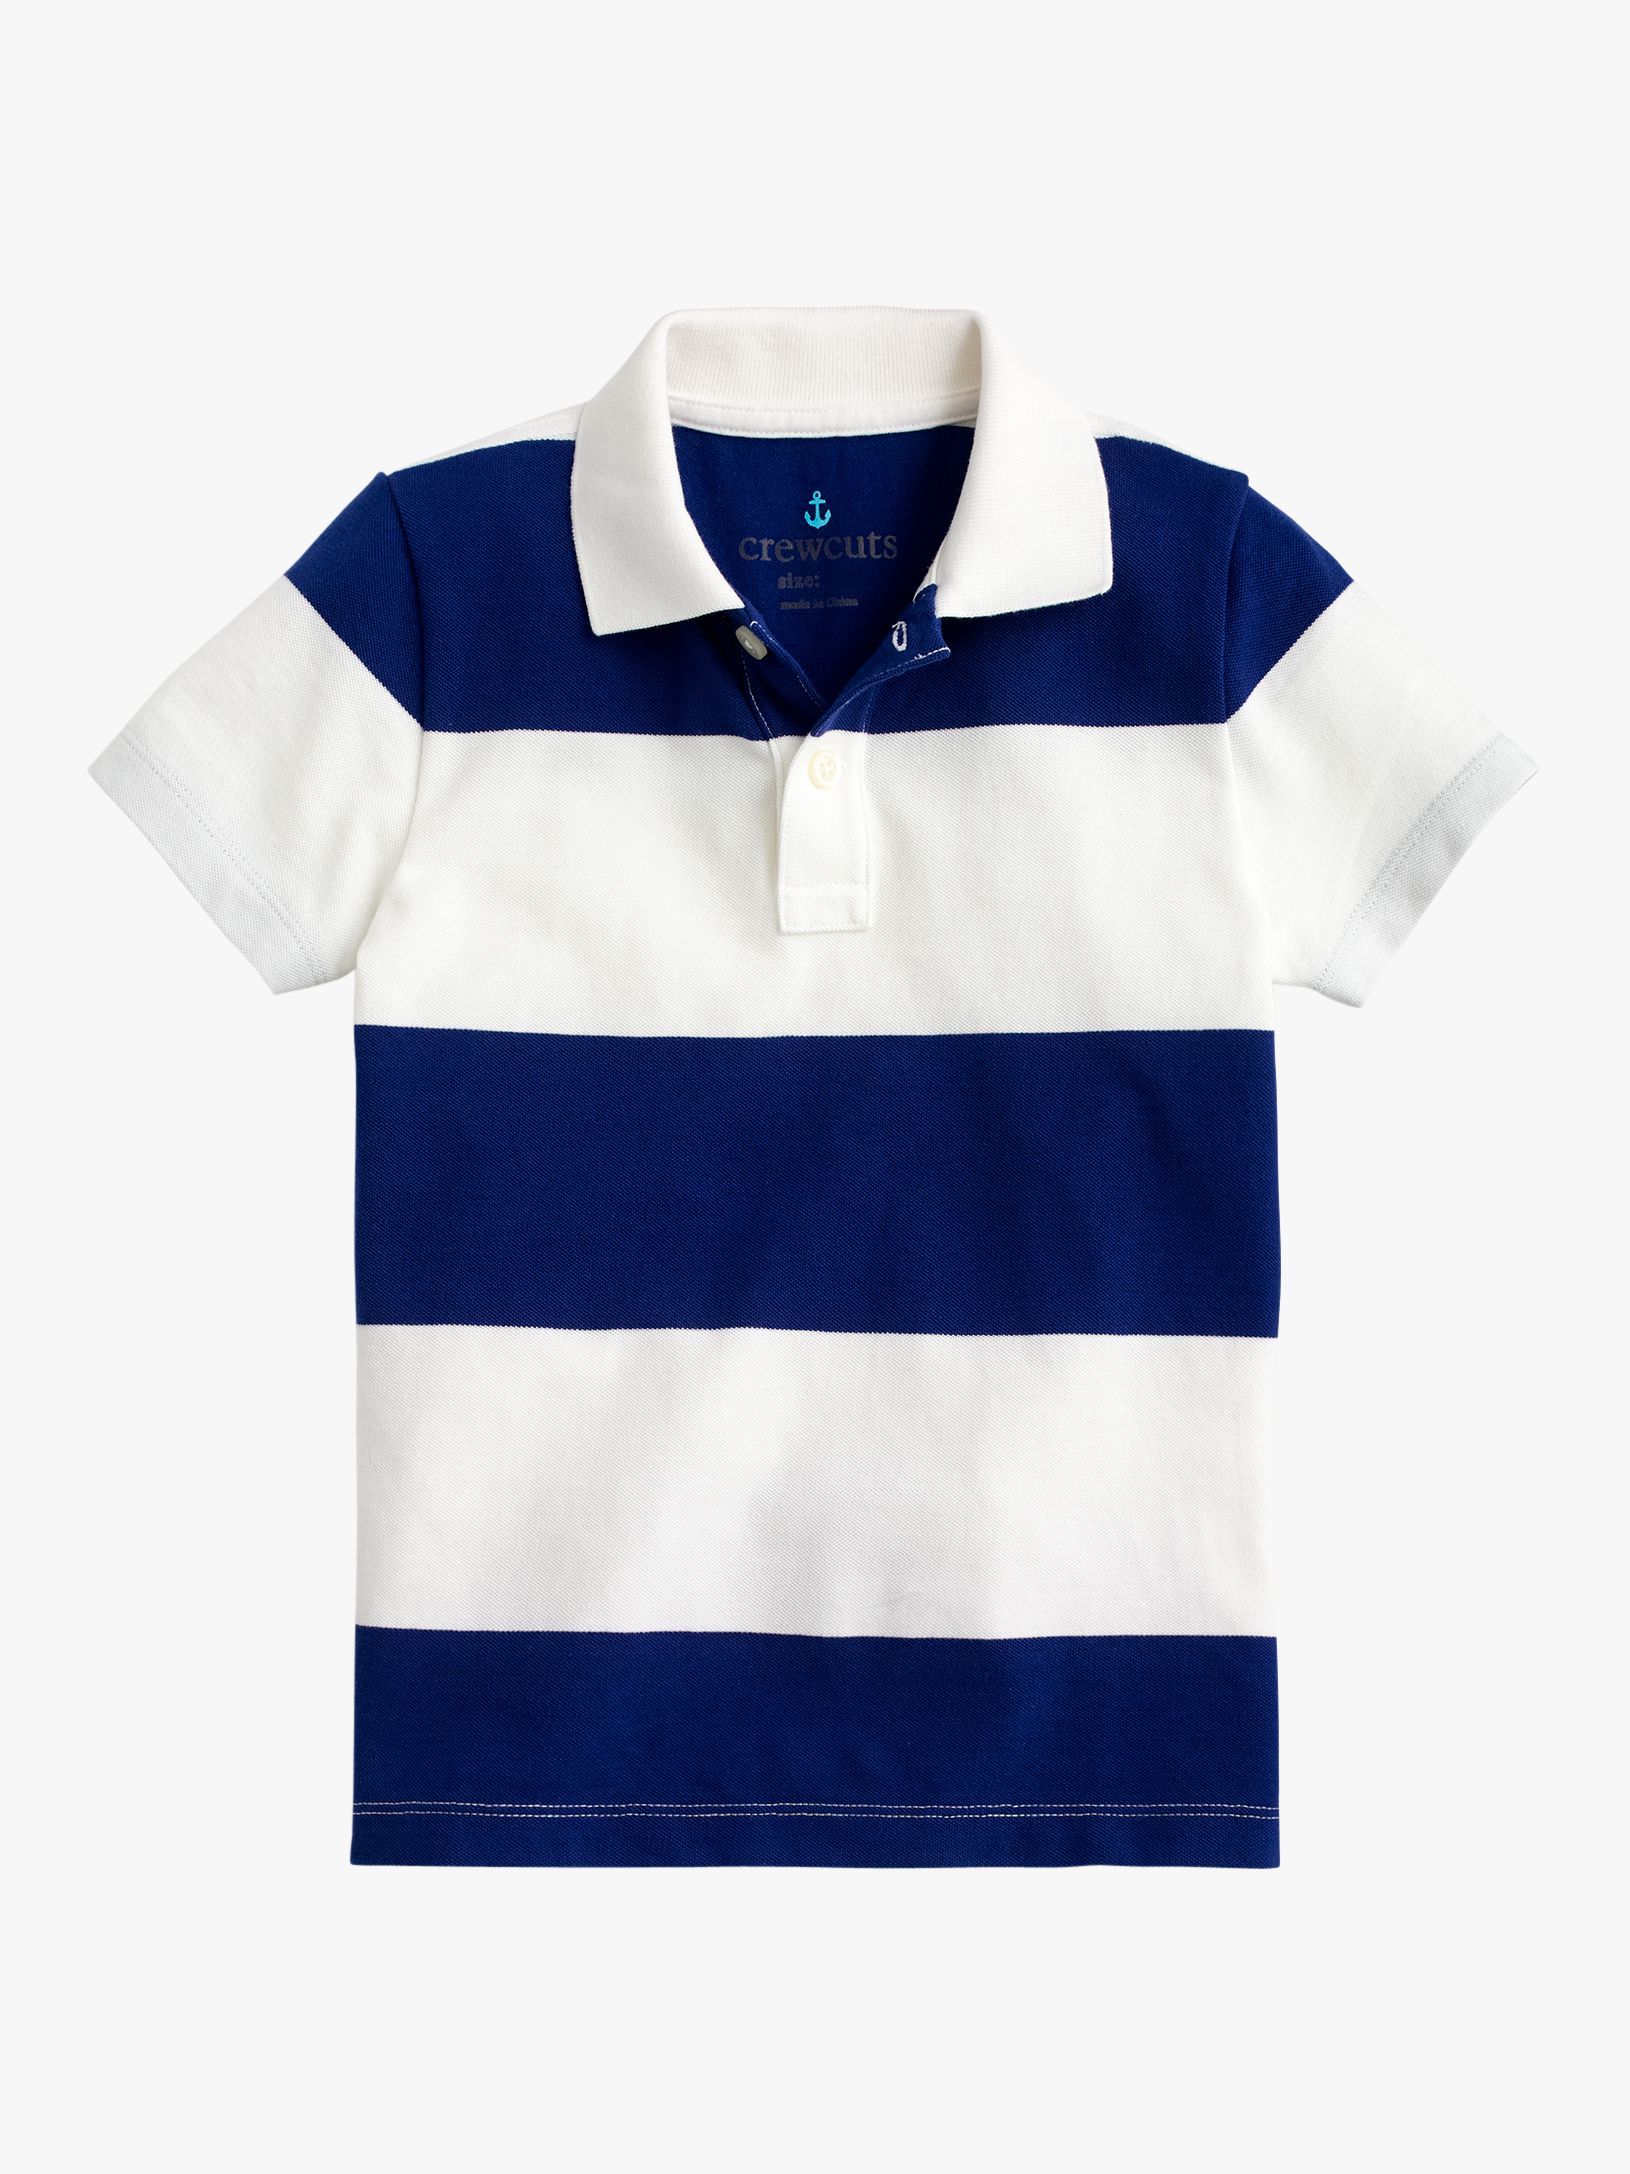 crewcuts by J.Crew Boys' Rugby Stripe Polo Shirt, Ivory/Blue